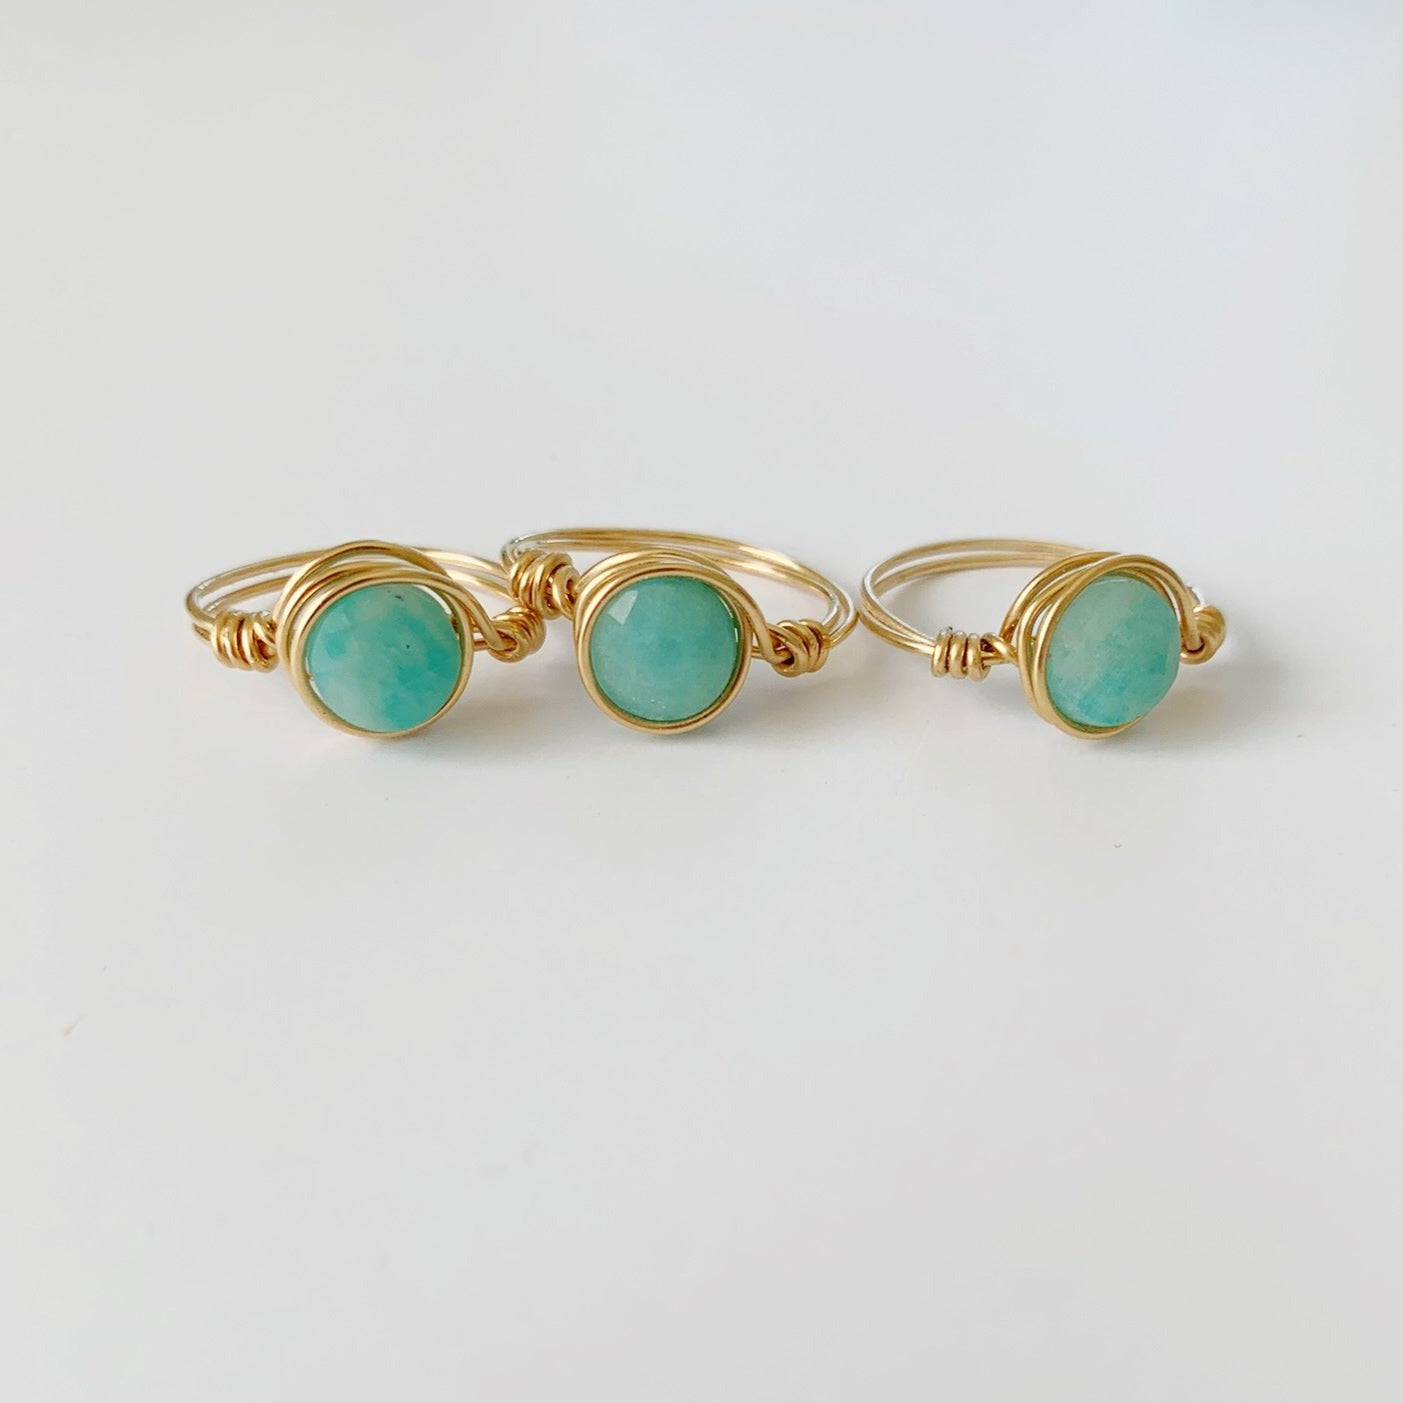 A photo of 3 captiva rings by mermaids and madeleines photographed on a white surface. The rings are 14k gold filled wire wrapped with amazonite gems